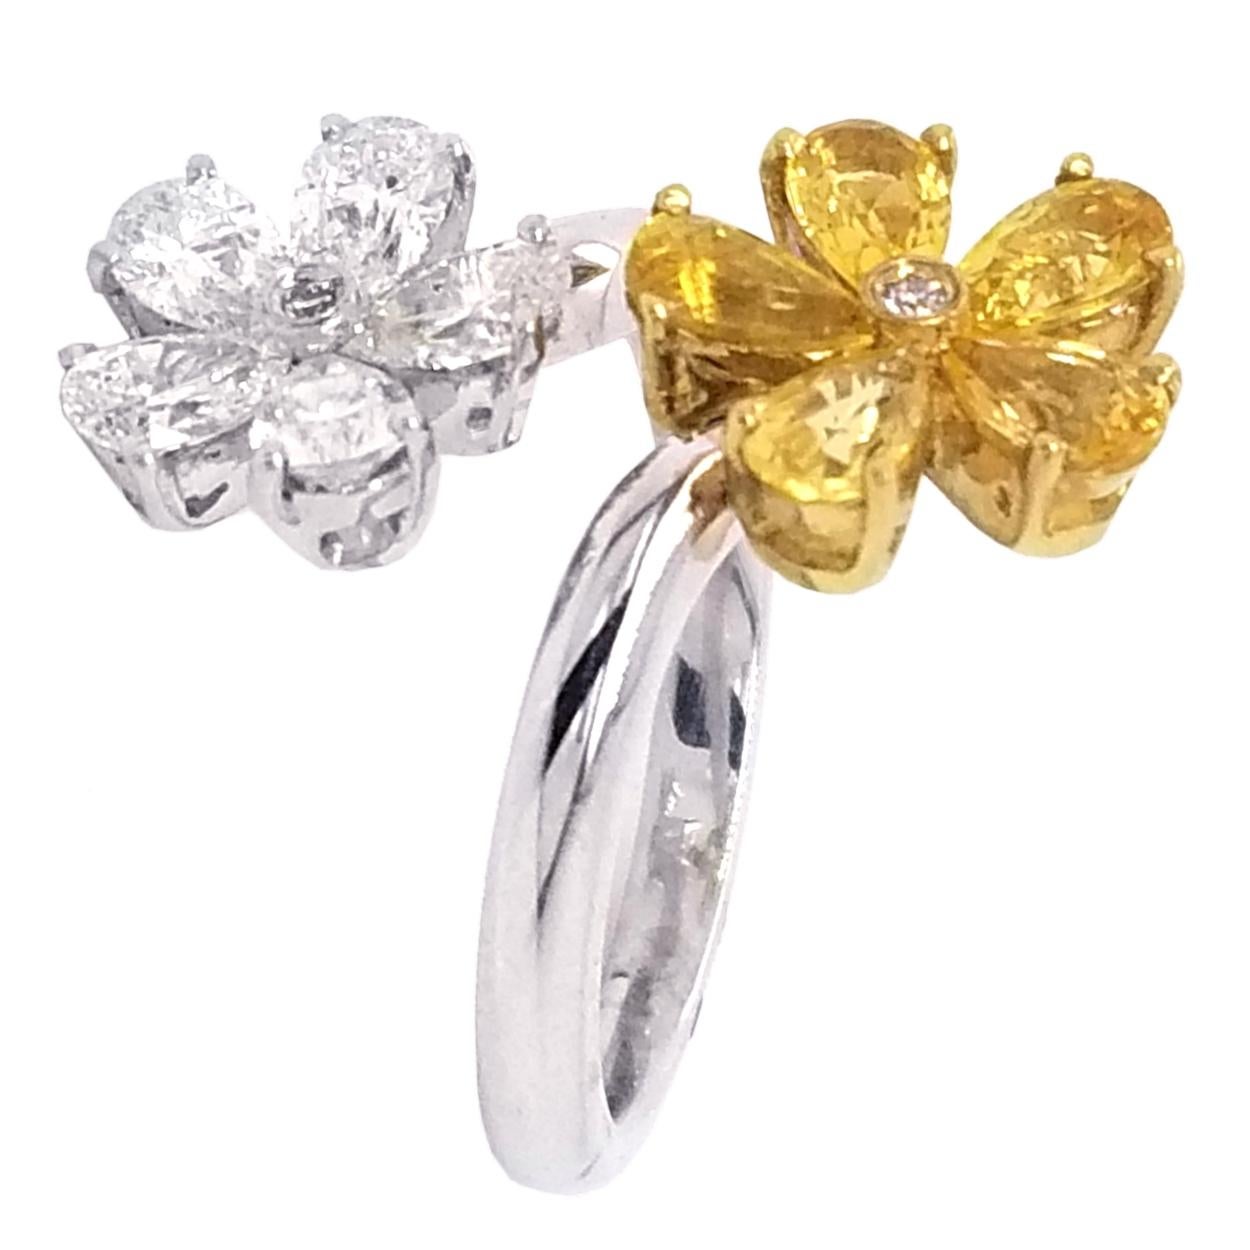 Two flower made up 5  Pear Shape diamonds and 5 Pear shaped Yellow Sapphires with a round Brilliant center for each create this beautiful fun ring made if 18K Gold.
Stones:
Diamonds: 5 Pear shaped and 2 Round Brilliant- Total weight 1.00 Ct
Yellow